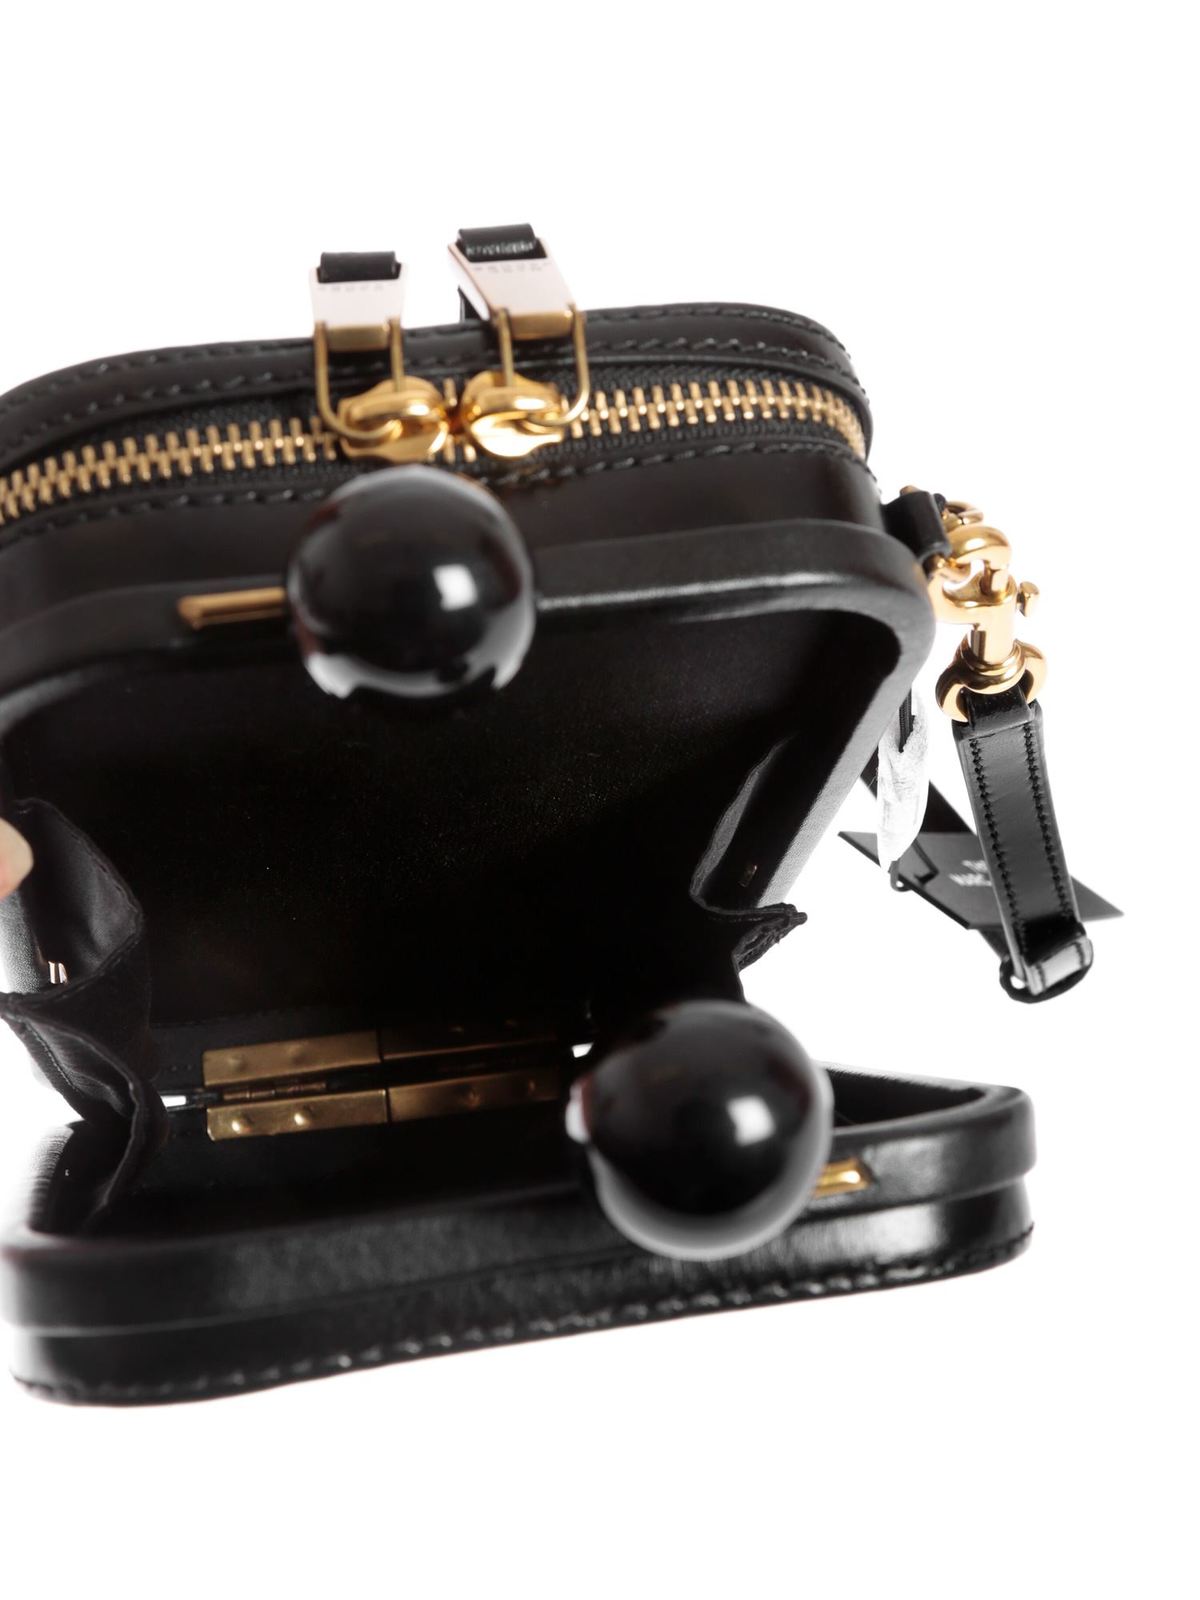 Black and Gold Marc Jacobs Purse/clutch 